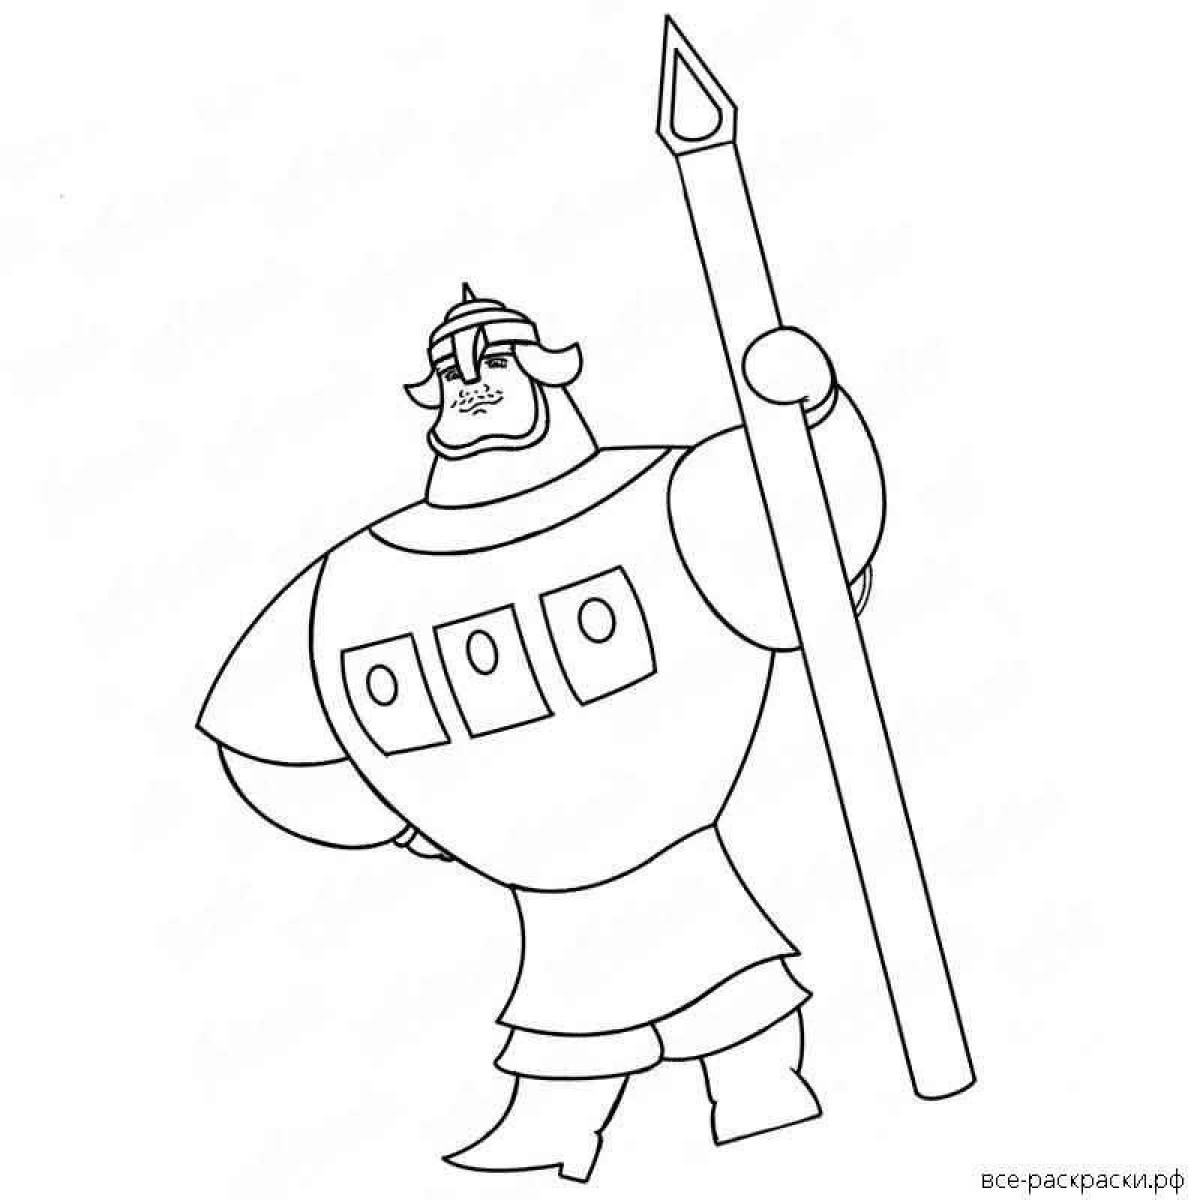 Famous coloring pages heroes of the Russian land